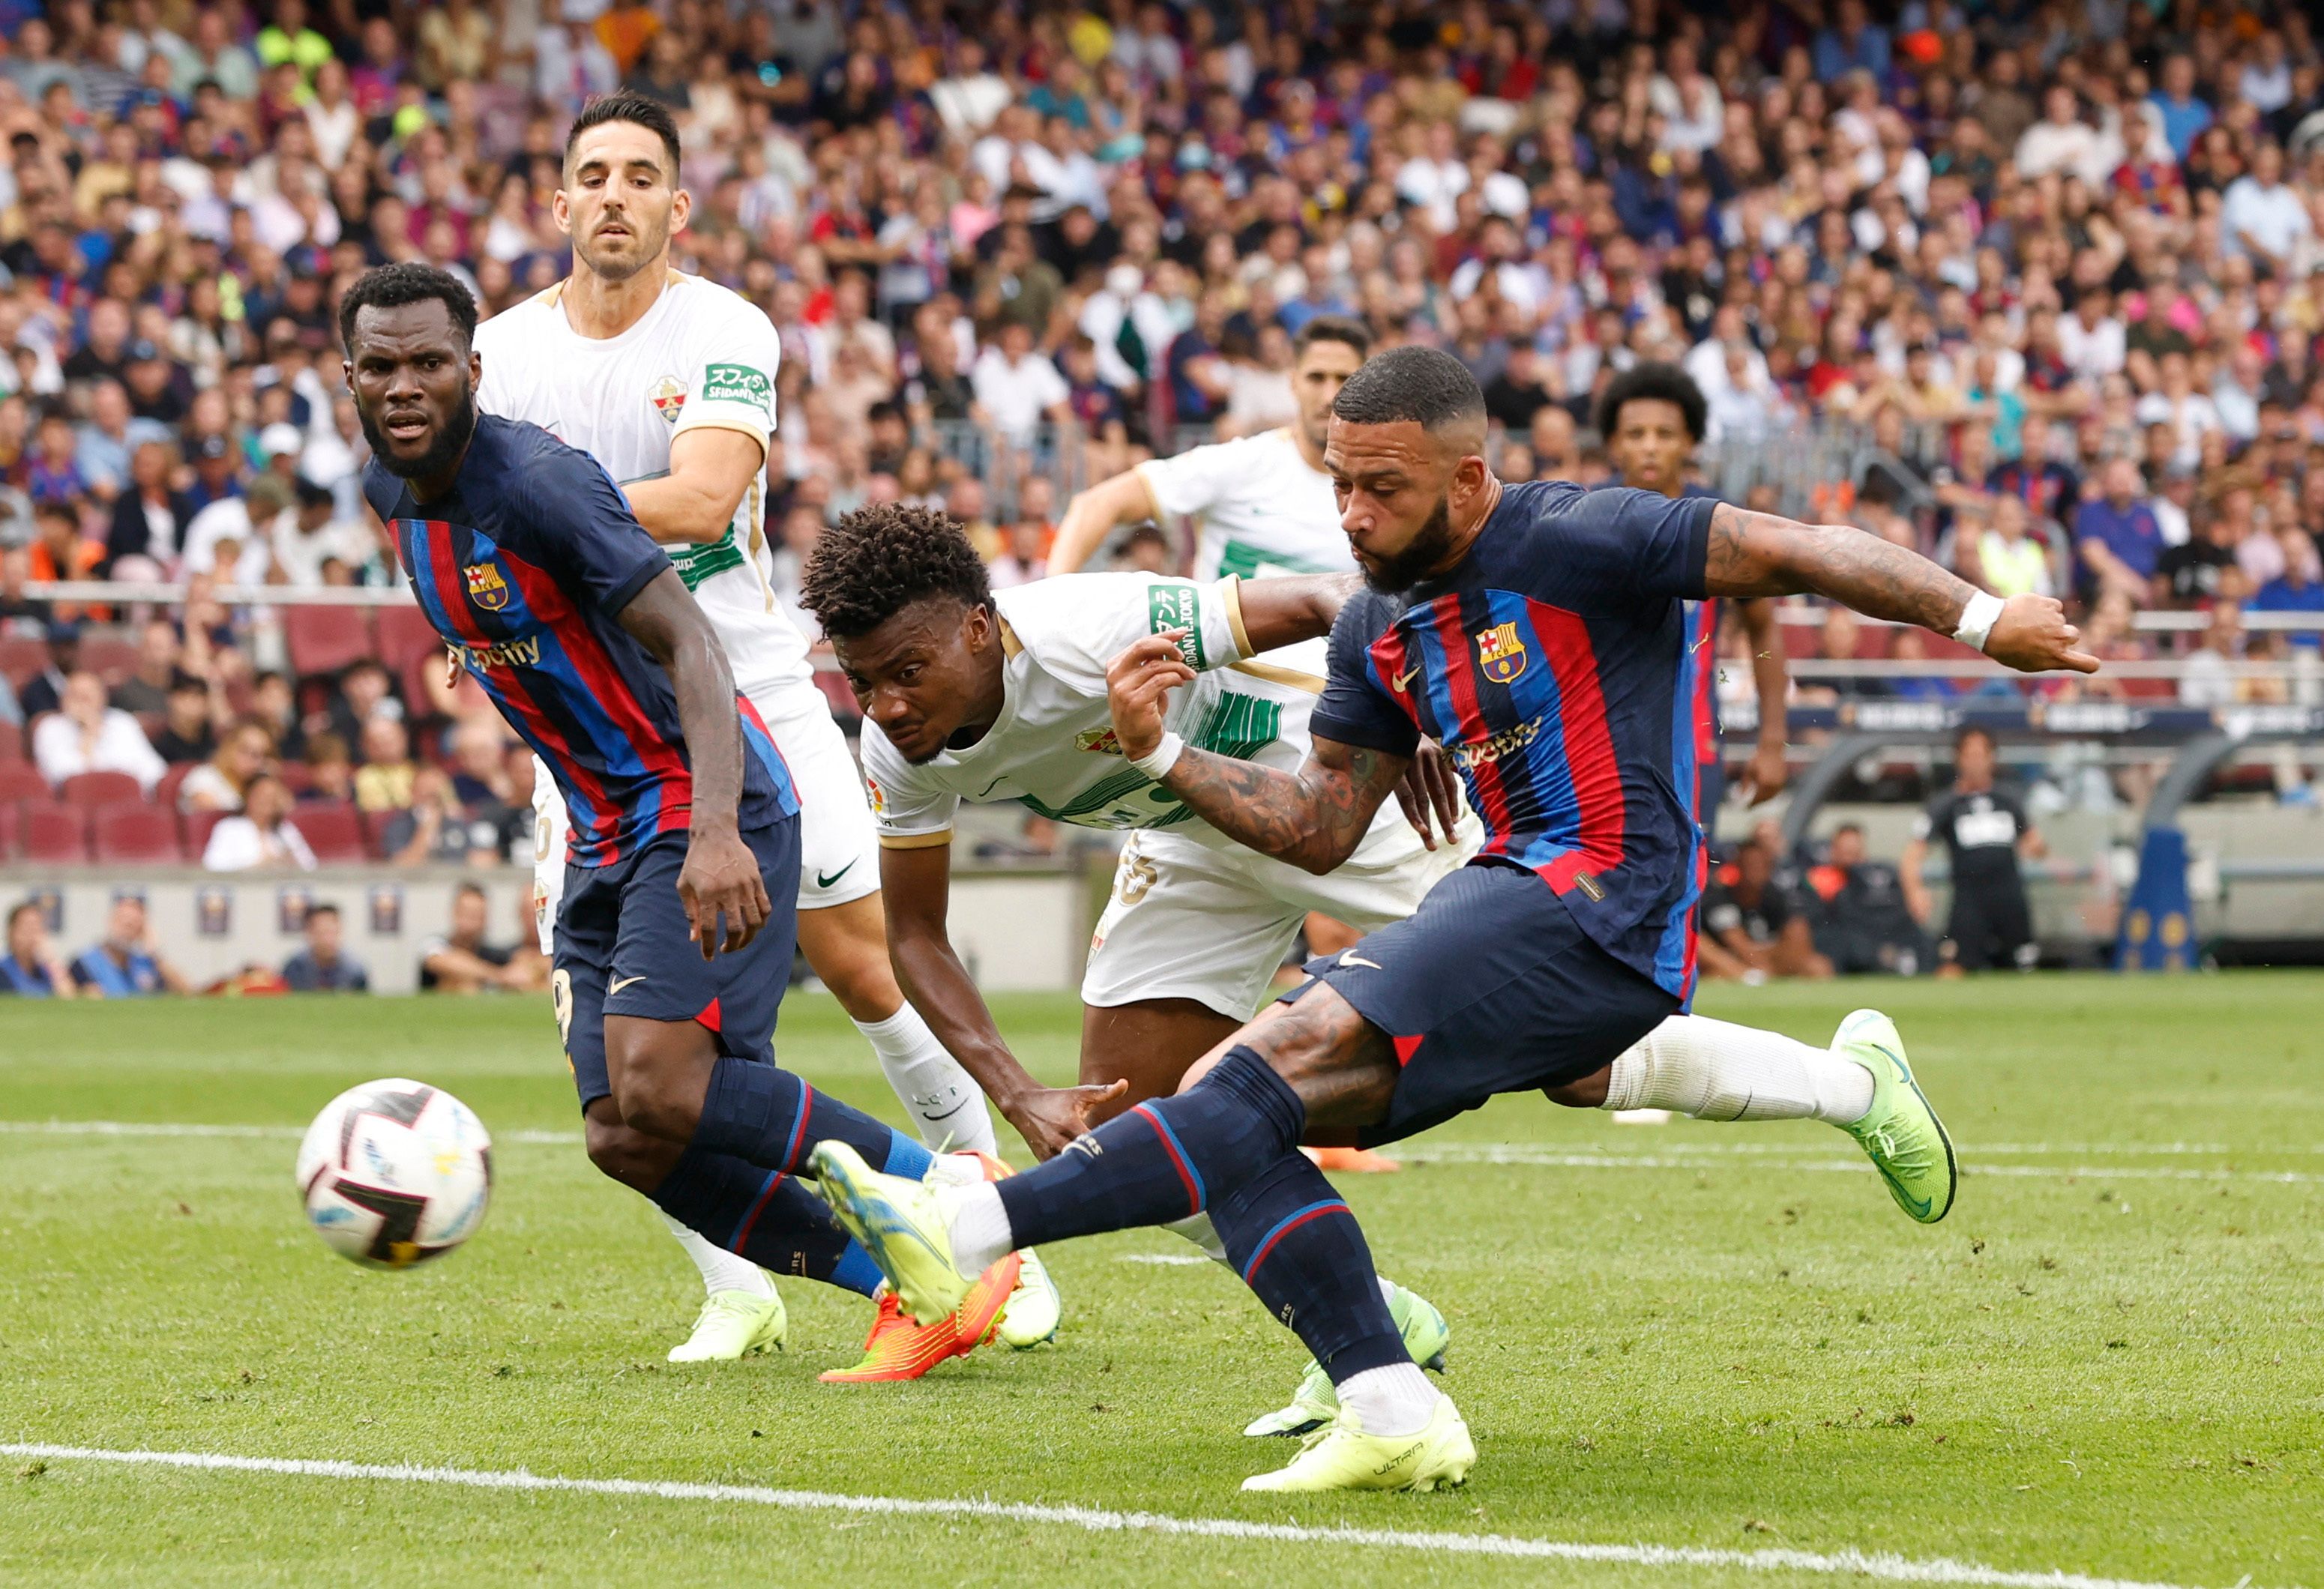 Barcelona 3-0 Elche: Memphis Depay used trademark move to score great goal